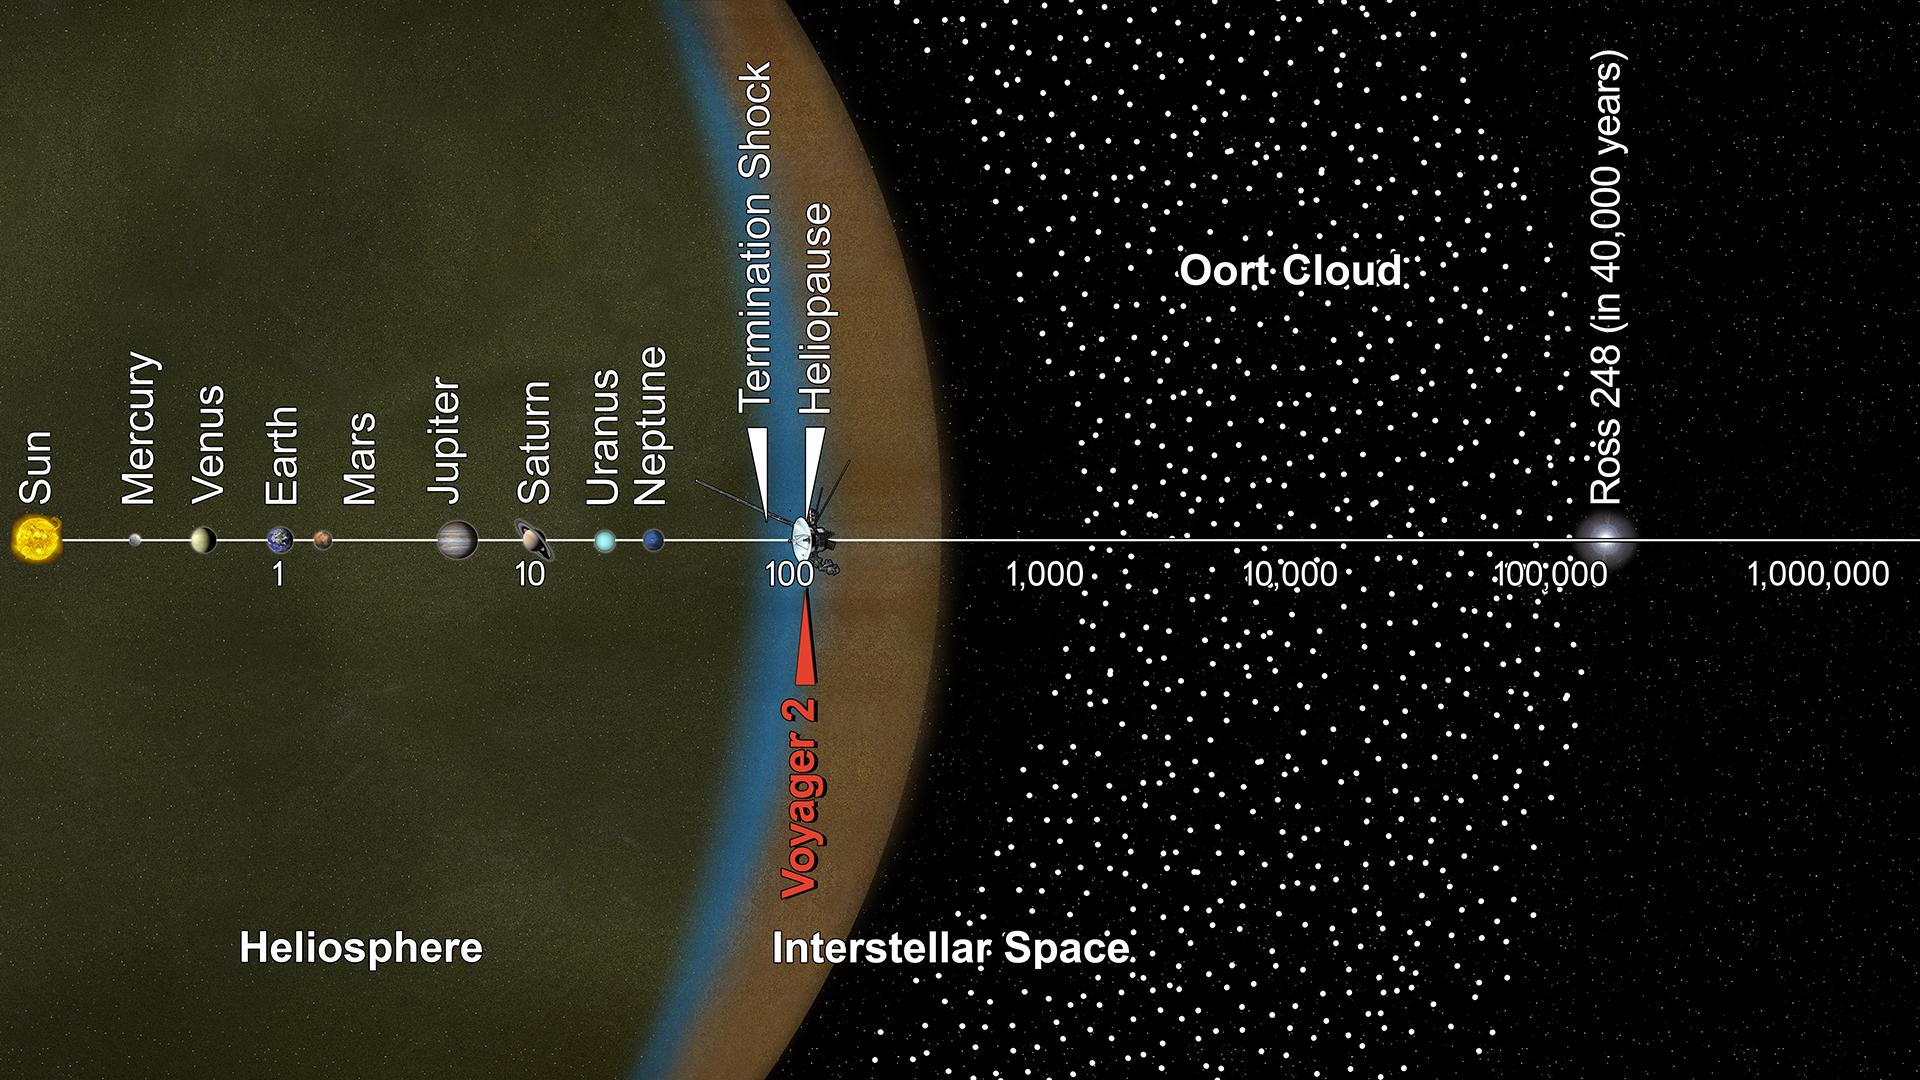 Oort Cloud And Scale Of The Solar System Infographic Nasa Solar System Exploration